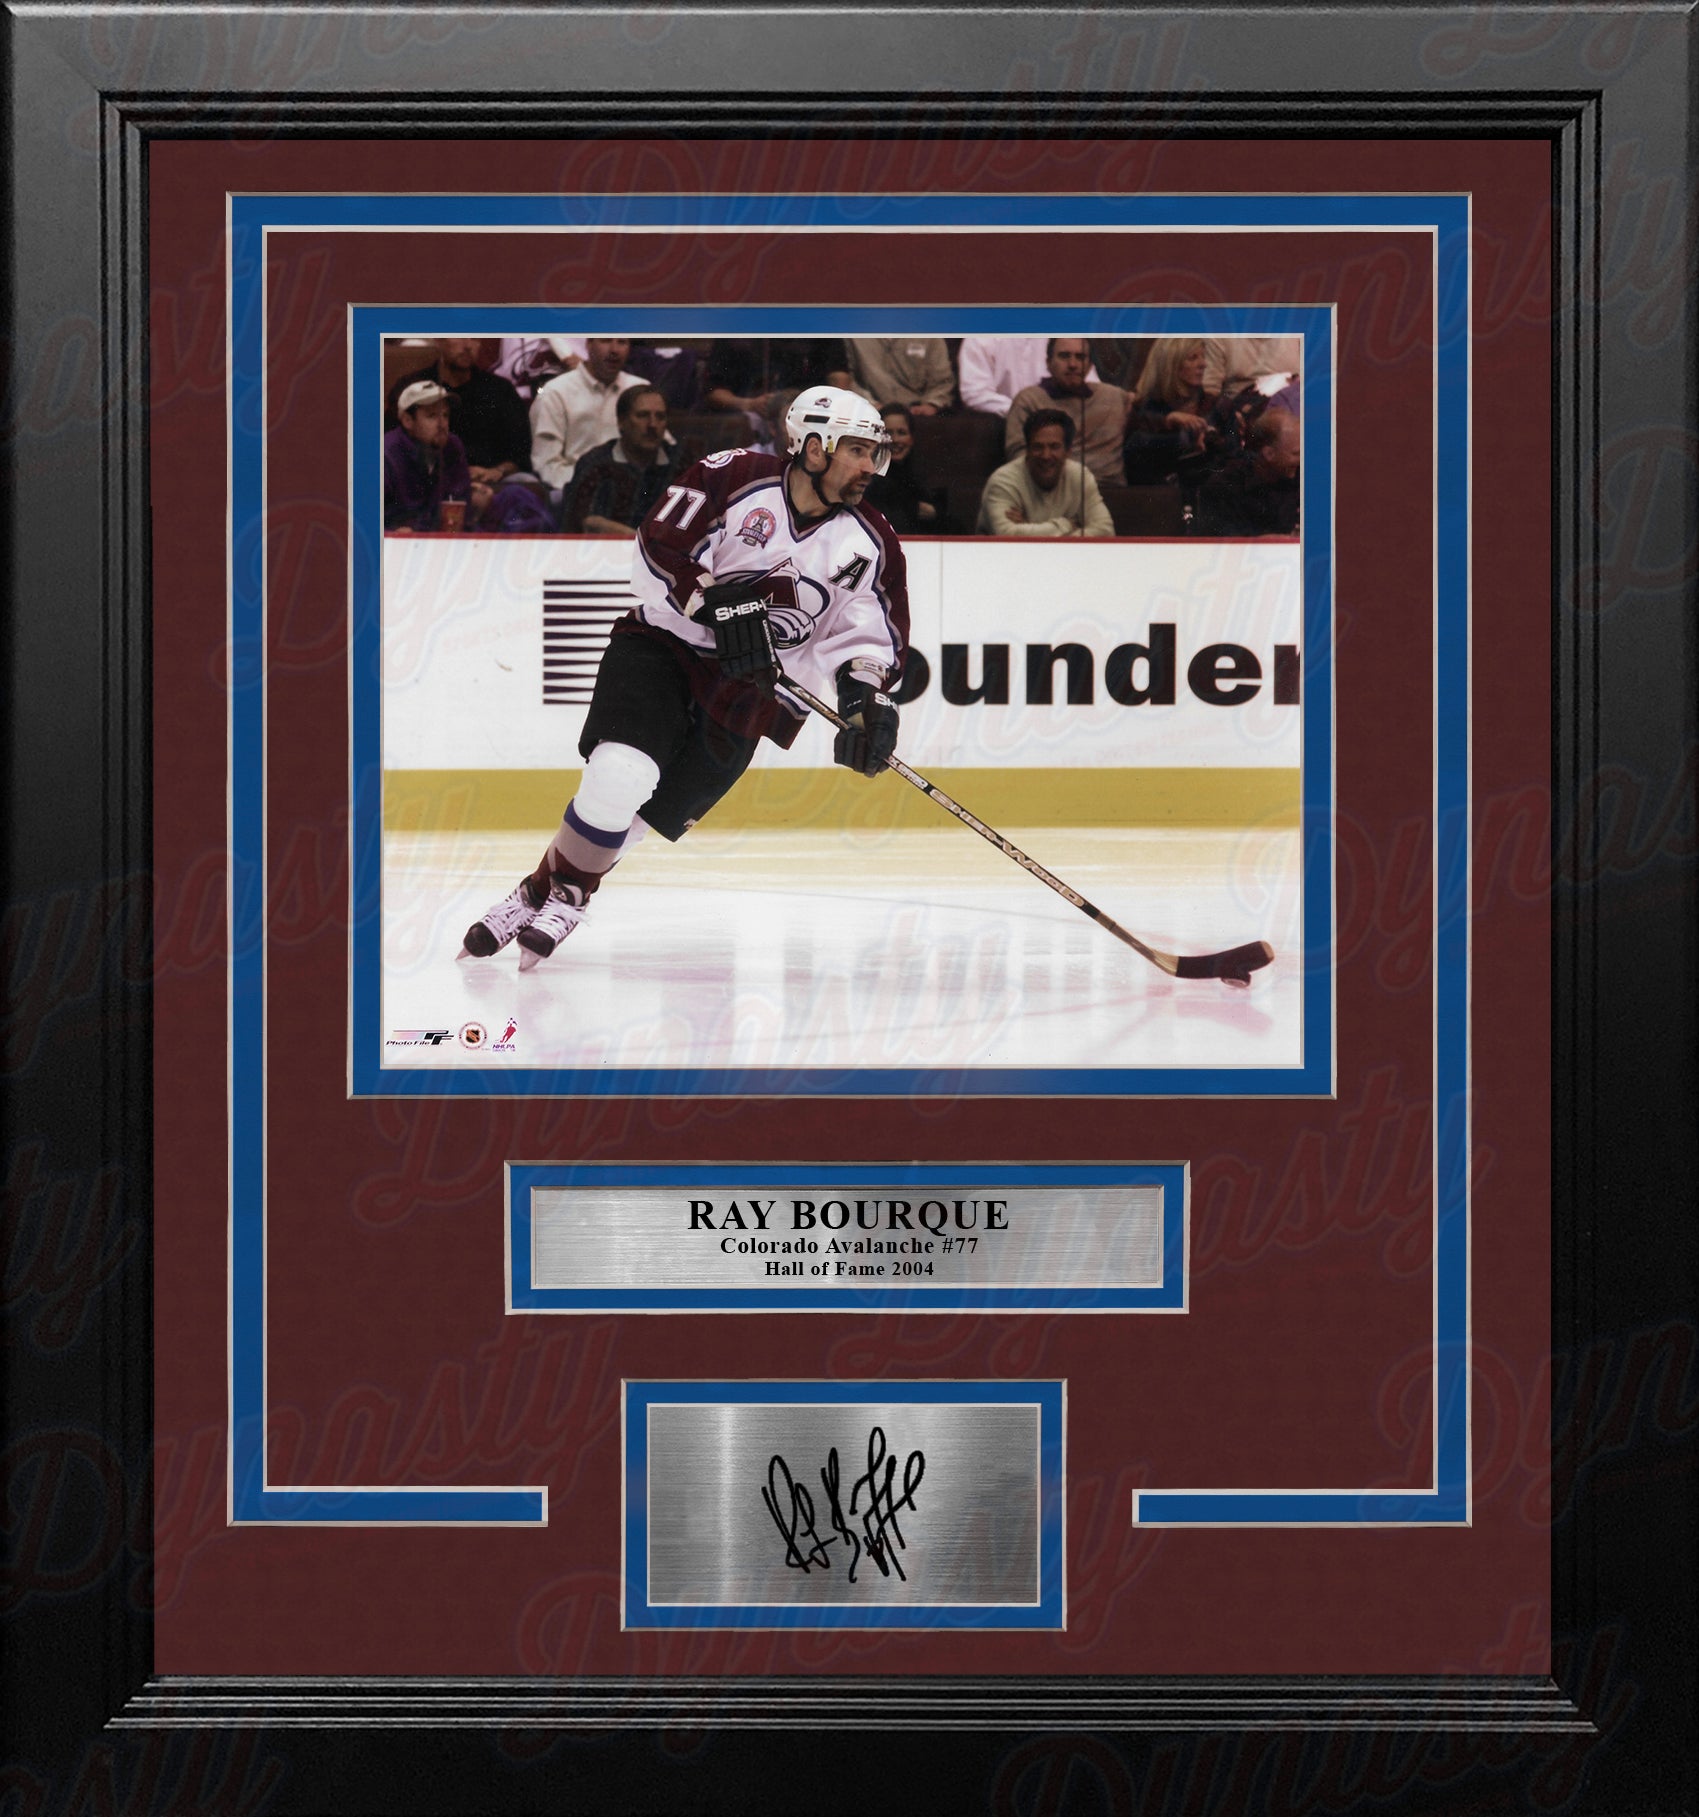 Ray Bourque in Action Colorado Avalanche 8" x 10" Framed Hockey Photo with Engraved Autograph - Dynasty Sports & Framing 